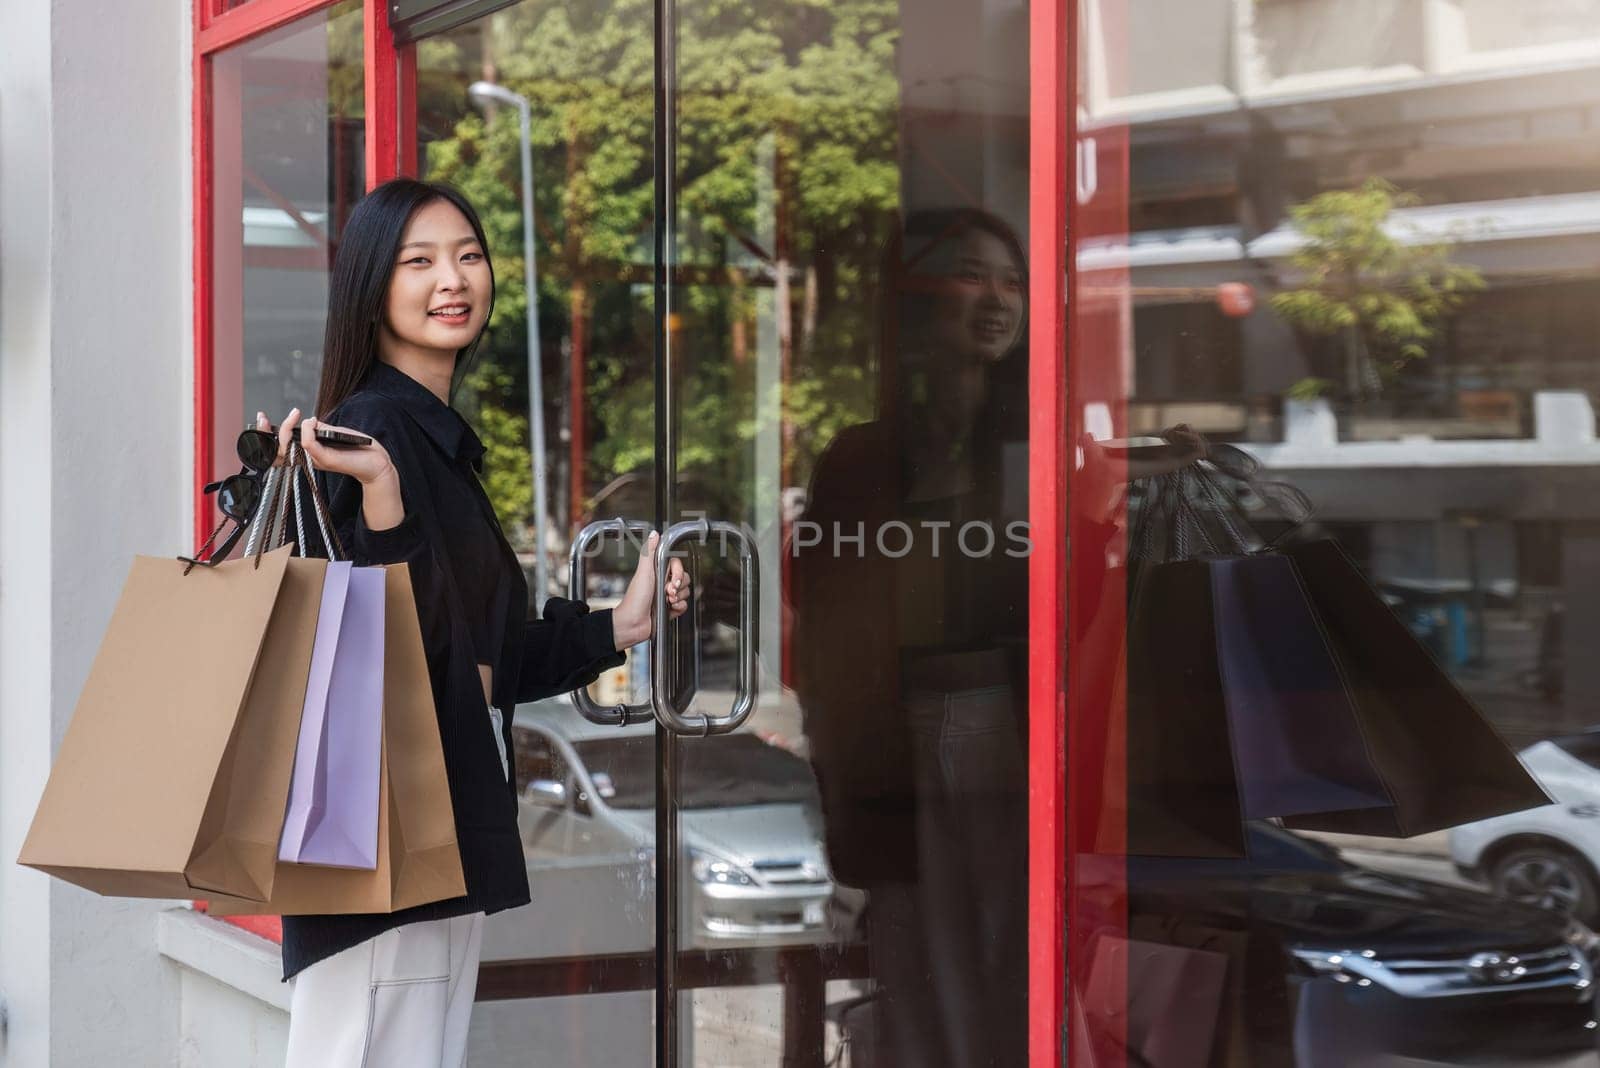 Asian woman using smartphone and looking away while enjoying a day shopping. Black Friday sale and discount. Buying clothes presents for holidays.